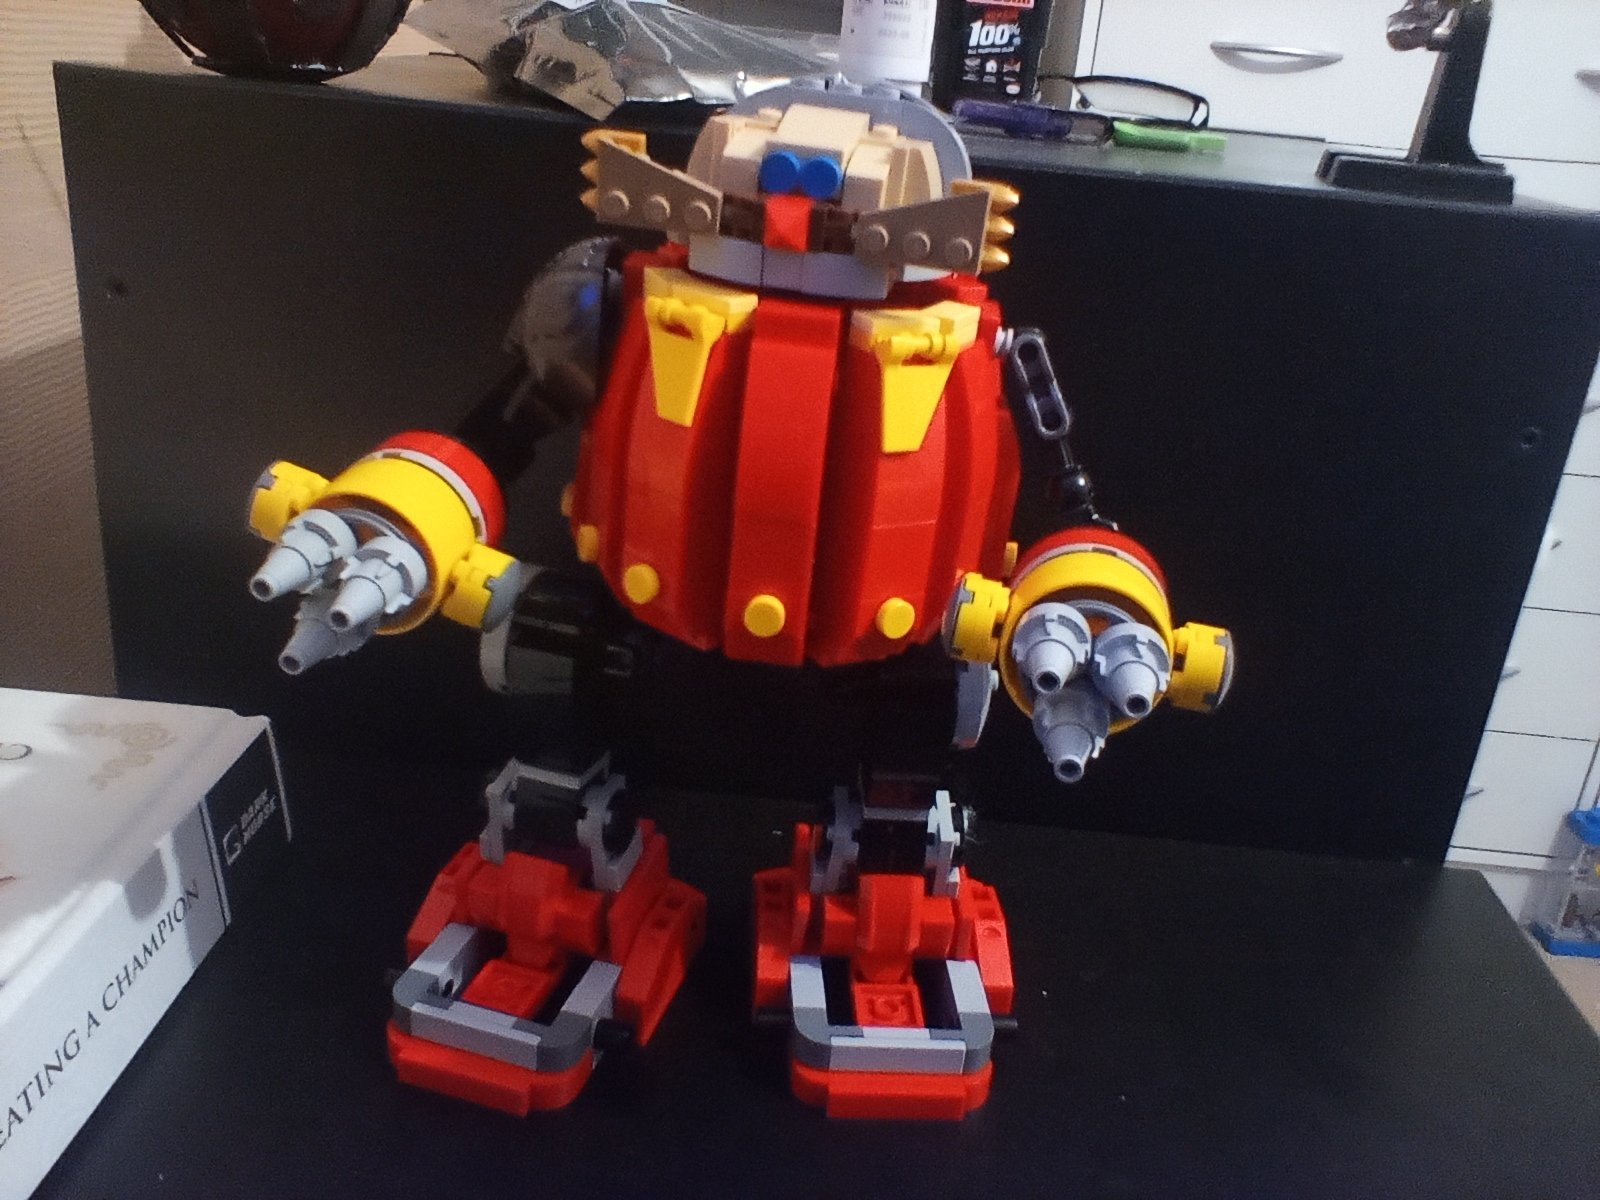 scottmac04 on Twitter: "Behold #LEGO master piece. The death egg robot from #SonicTheHedgehog from lego dimensions 2 (Some parts are missing and it has trouble standing but over i did